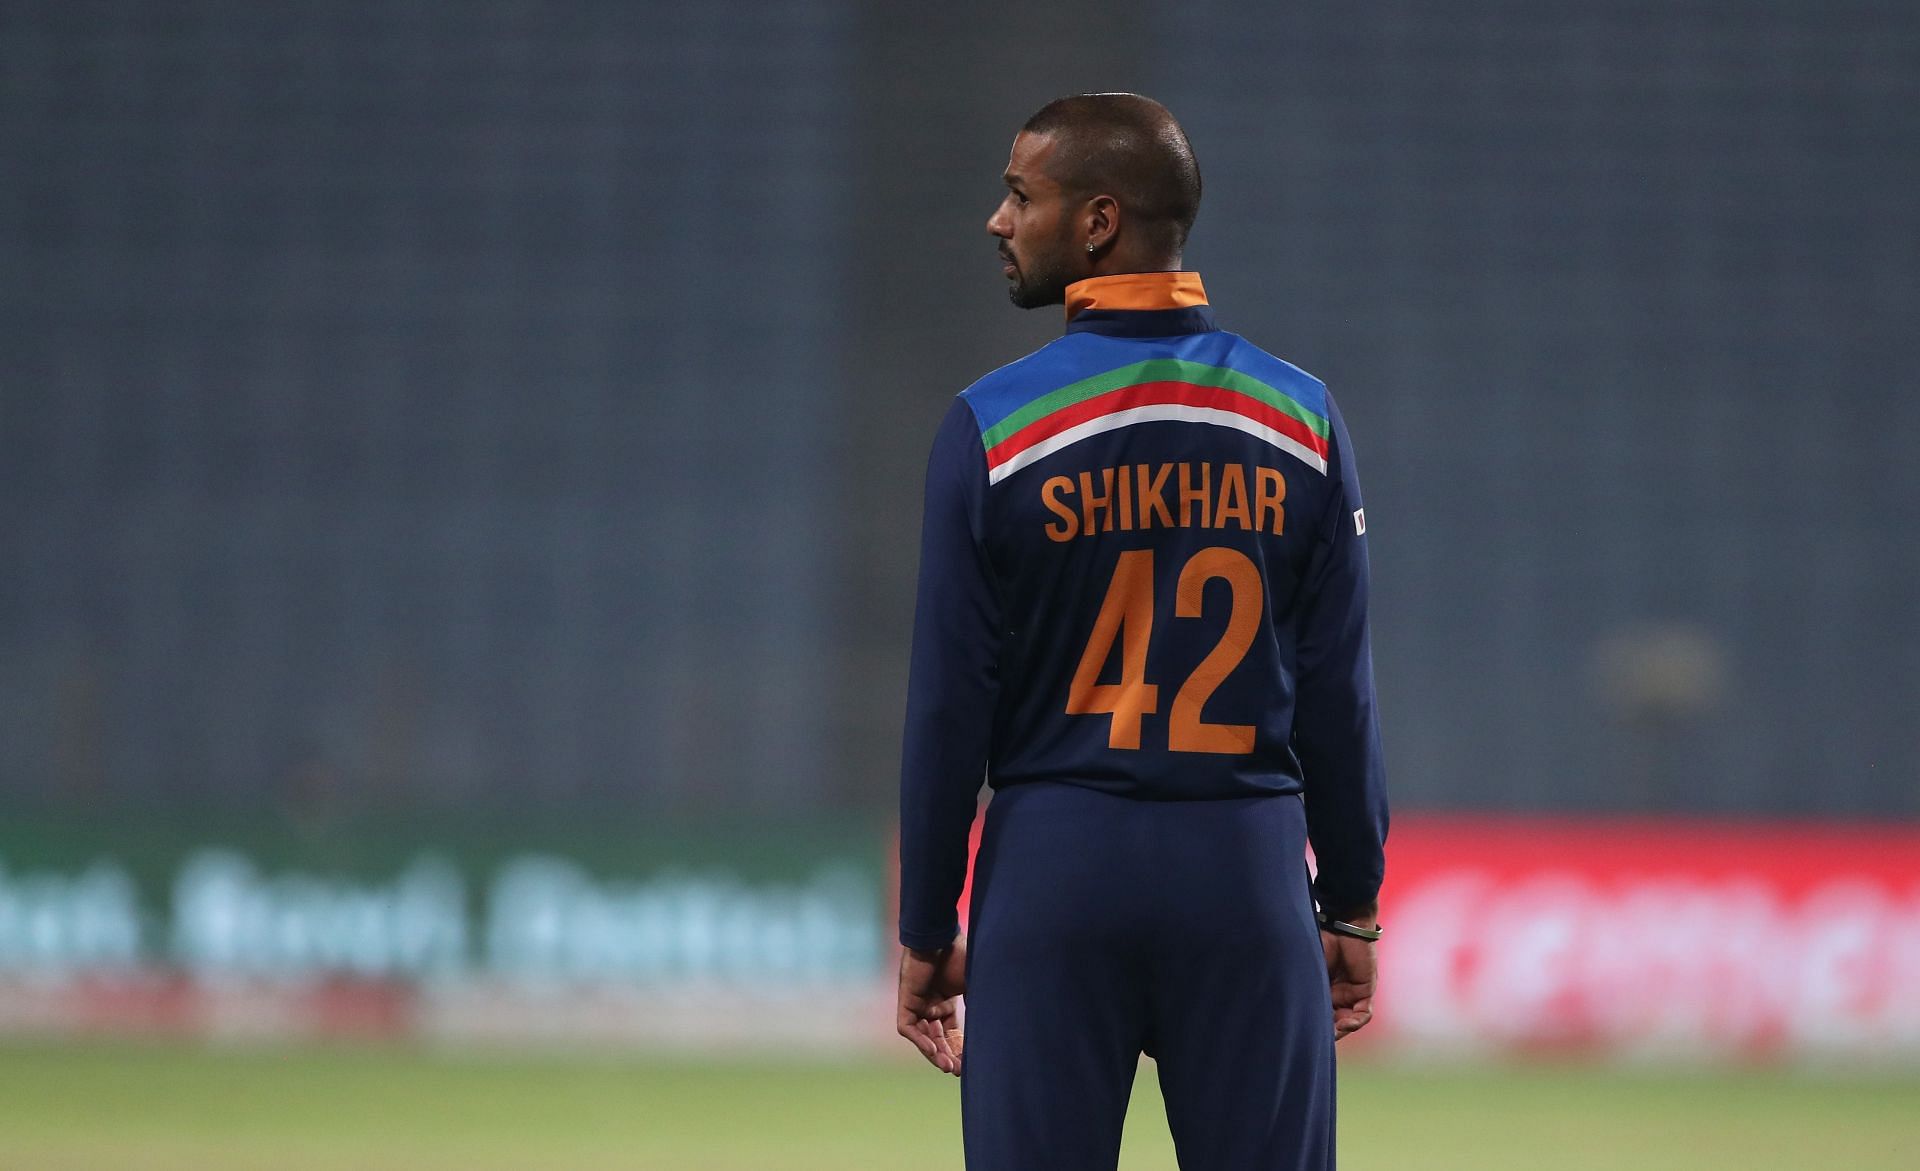 Dhawan is one of the leading run-scorers in the history of the IPL.